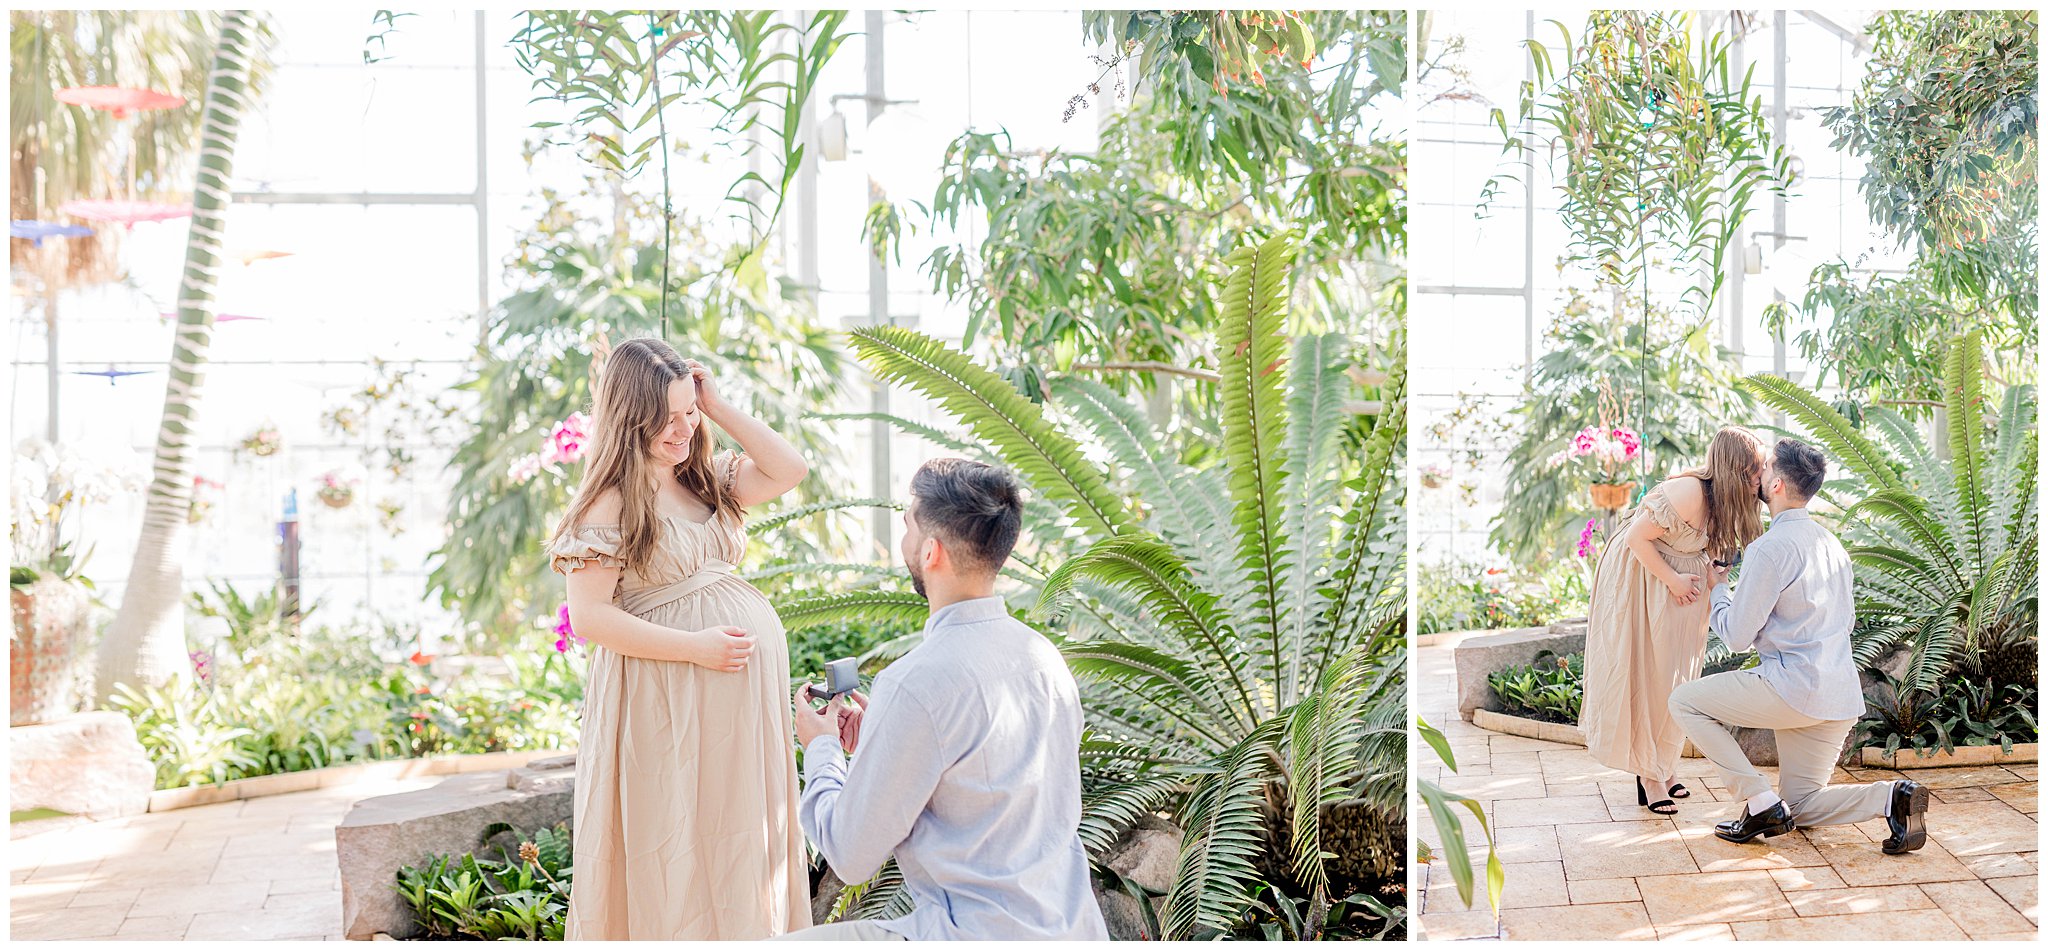 Featured image for “Surprise! It’s actually a proposal! – Nicholas Conservatory & Gardens, Rockford, Illinois”